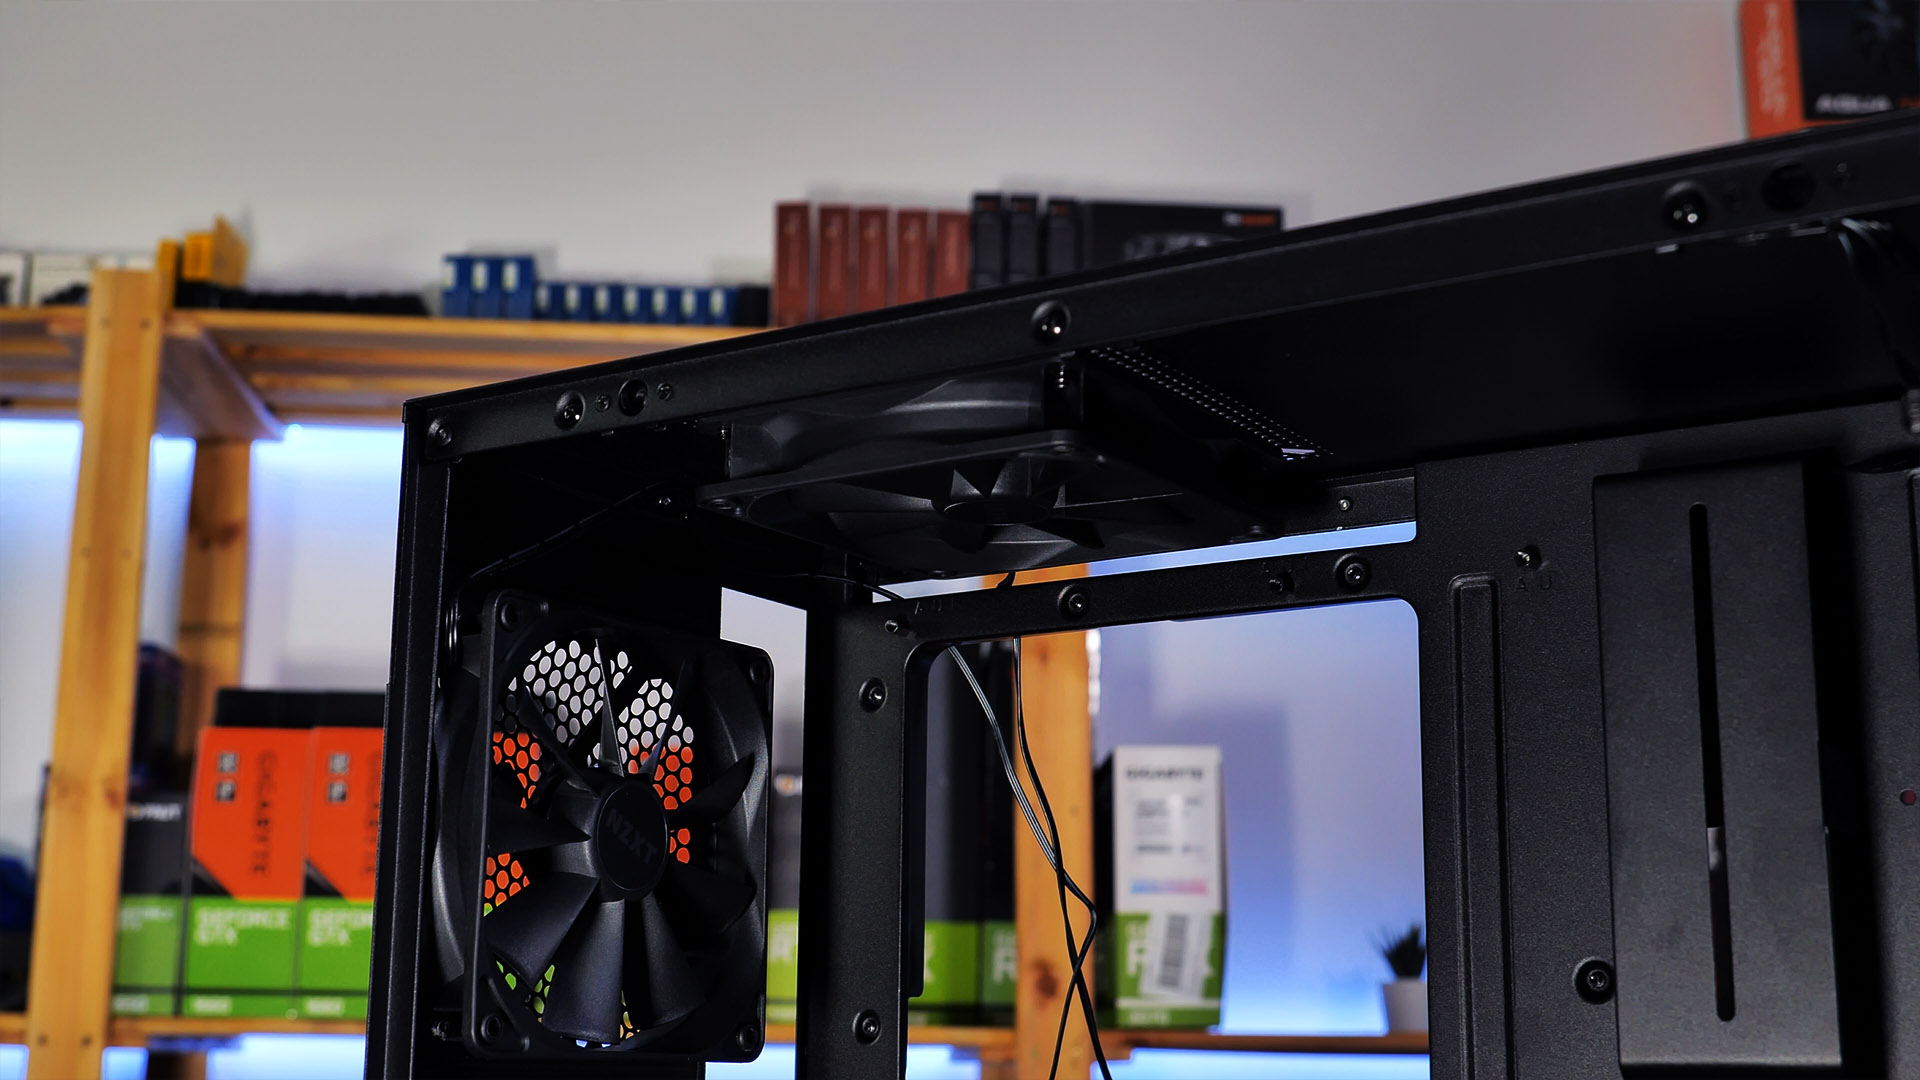 nzxt-h510i-fans